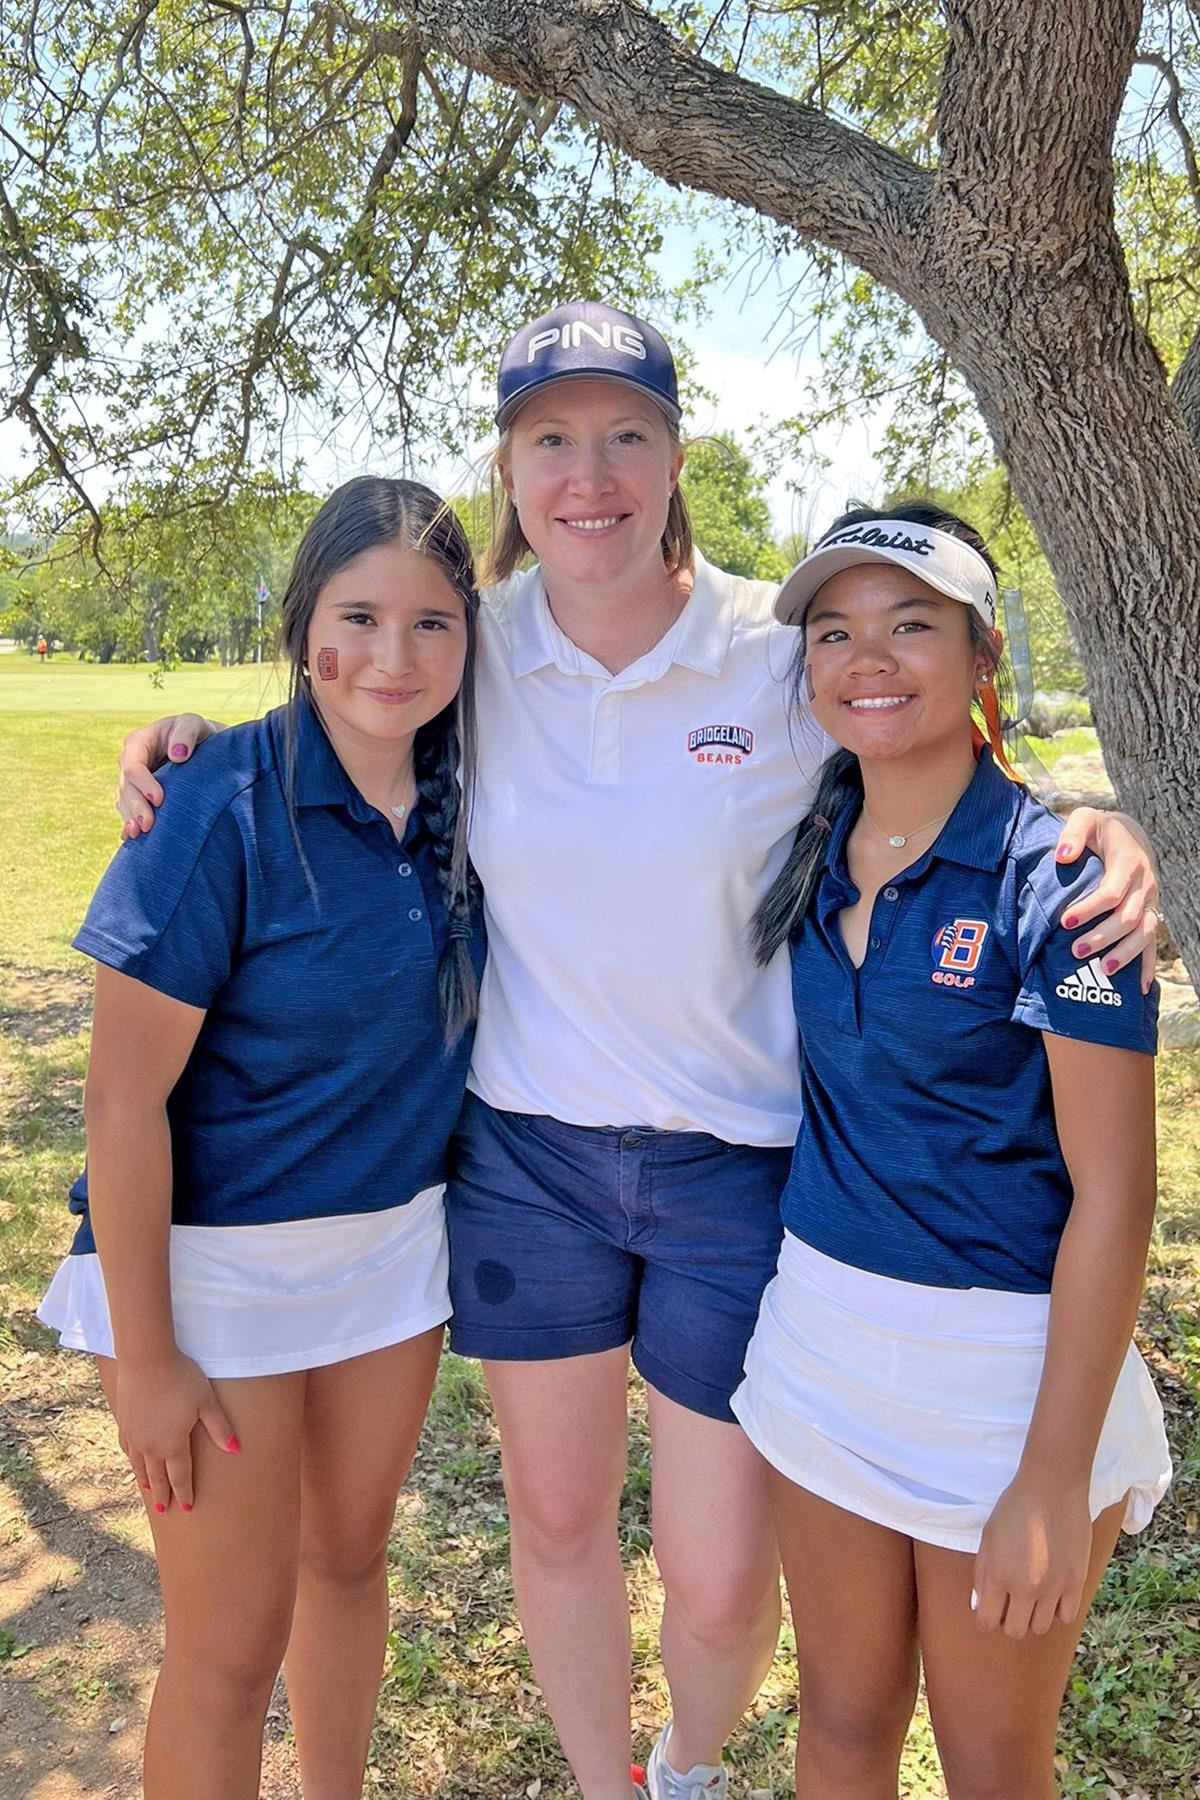 Bridgeland sophomore Jasmine Do, right, was among three CFISD golfers to compete at the UIL Girls’ Golf State Tournament.